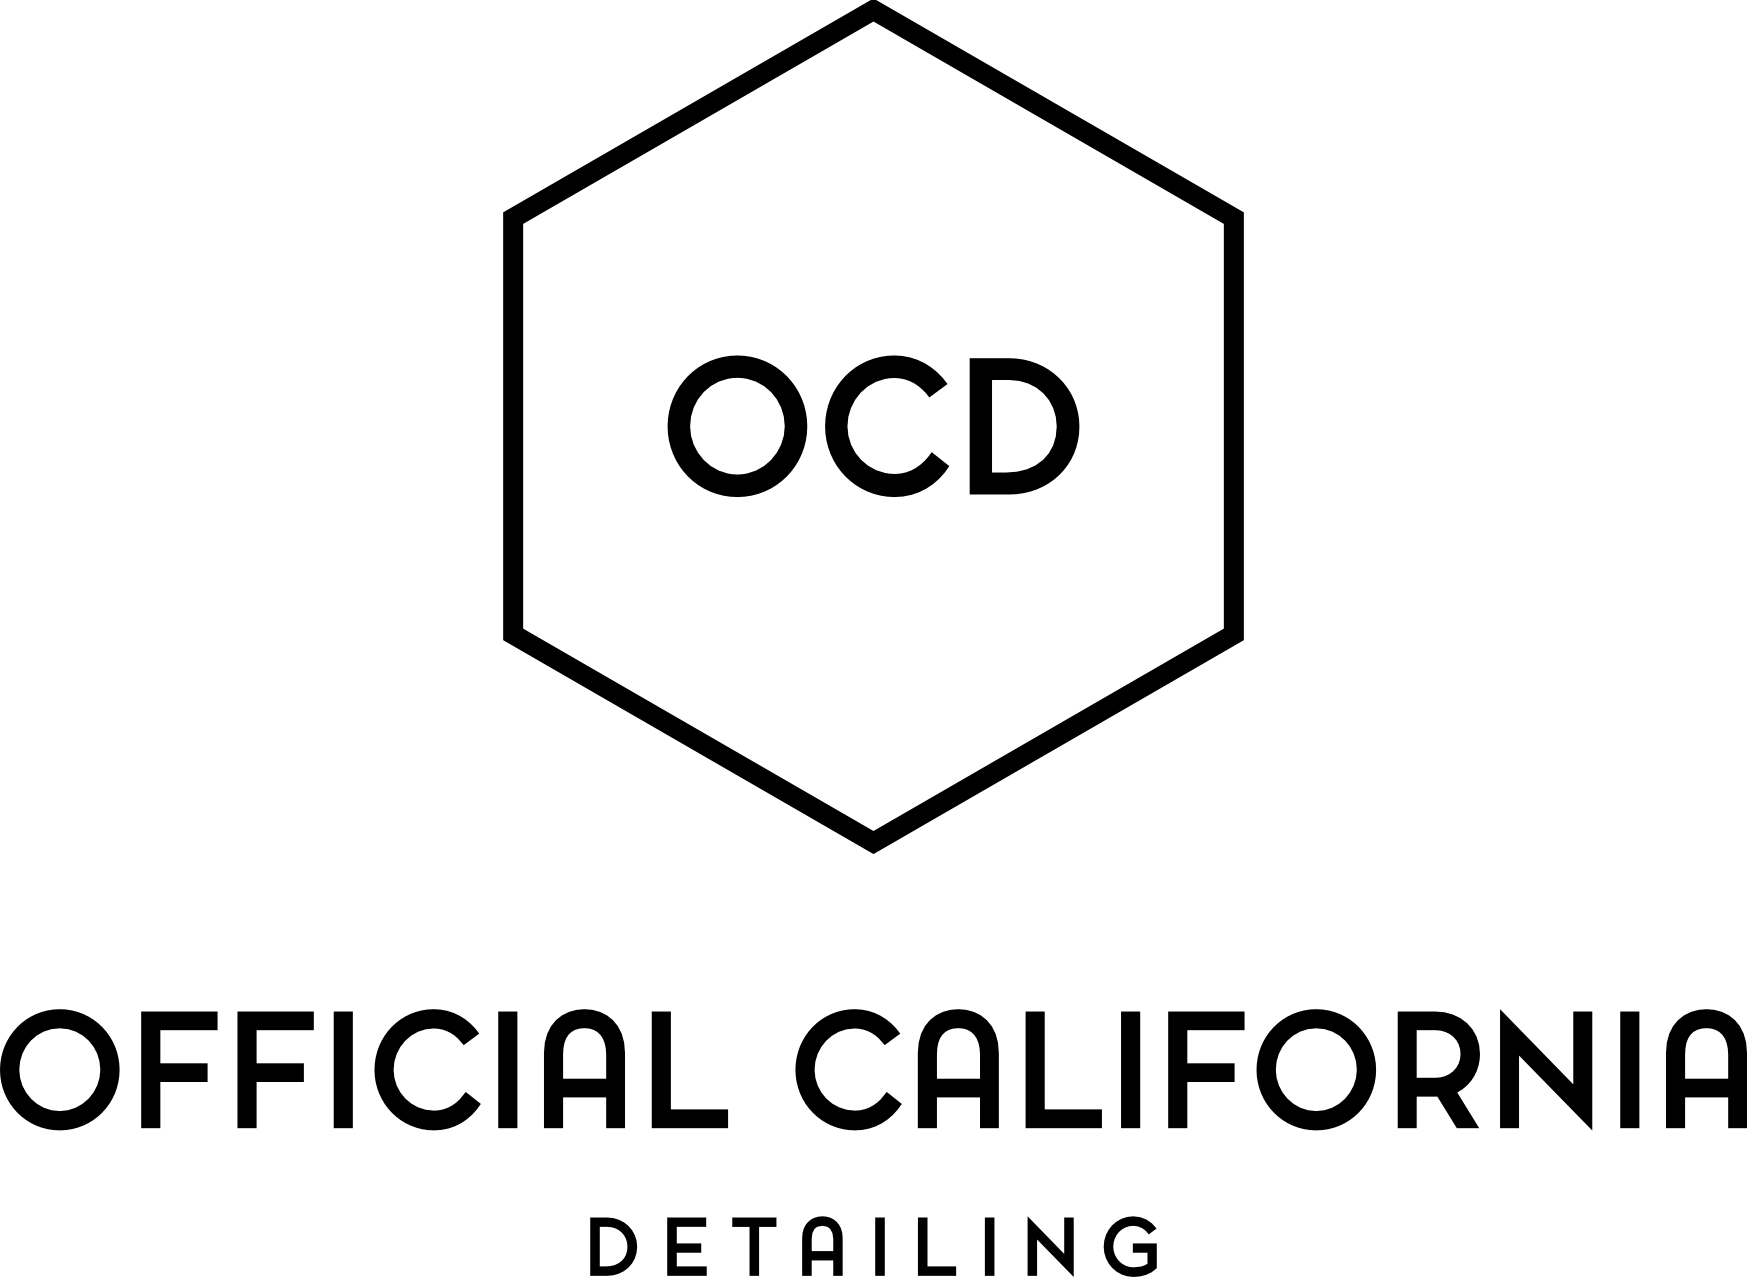 A black and white logo for official california detailing.